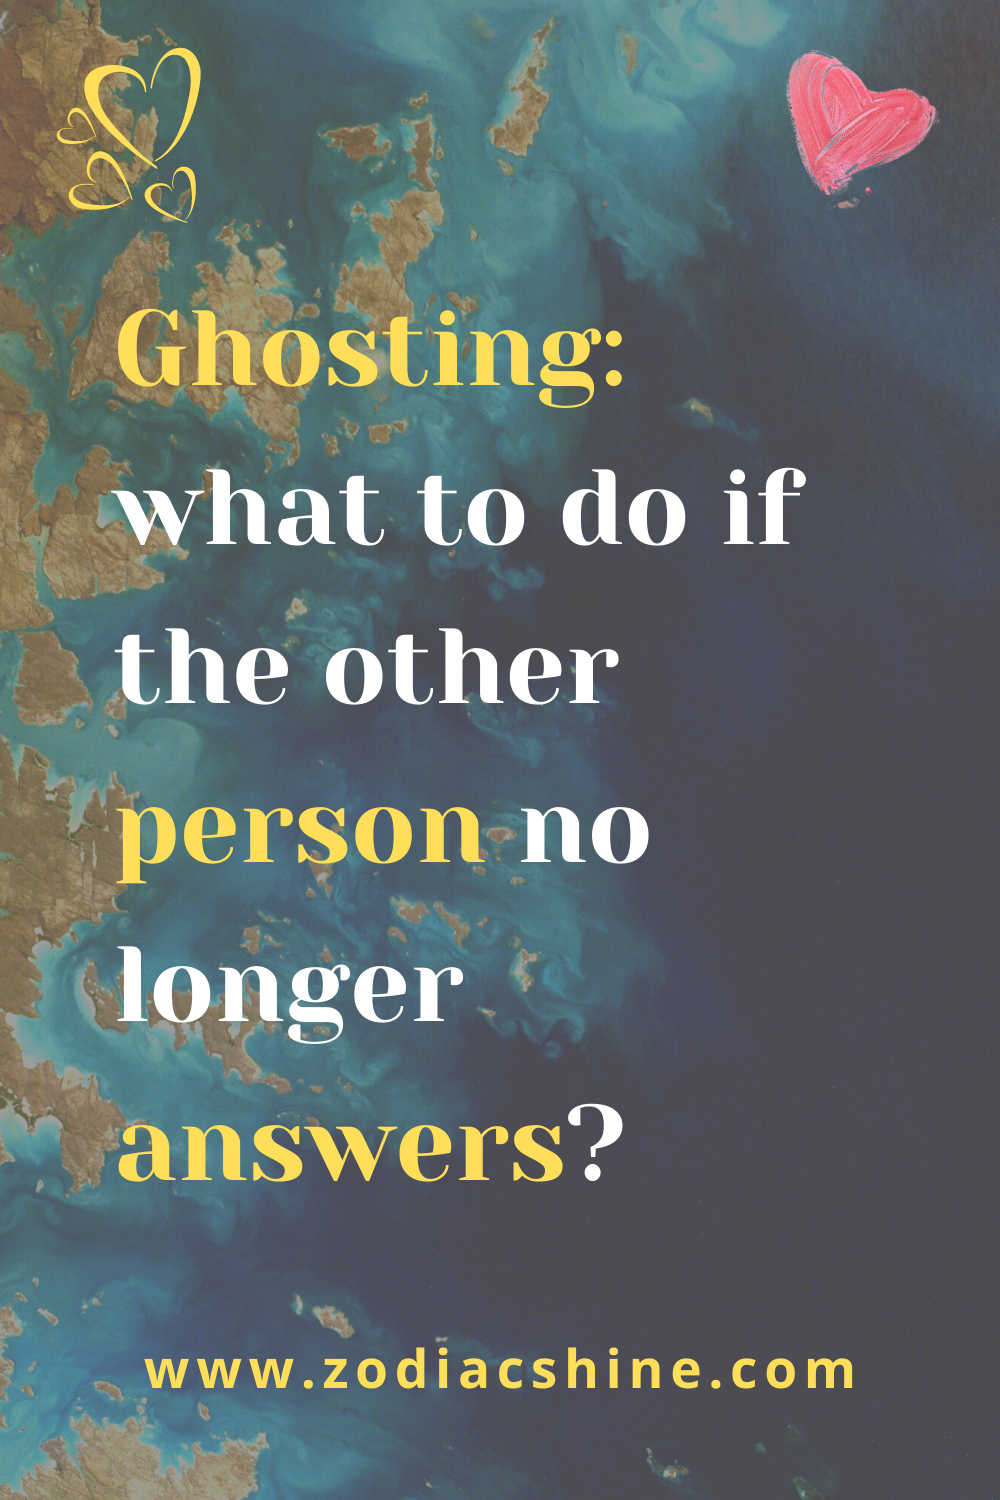 Ghosting: what to do if the other person no longer answers?